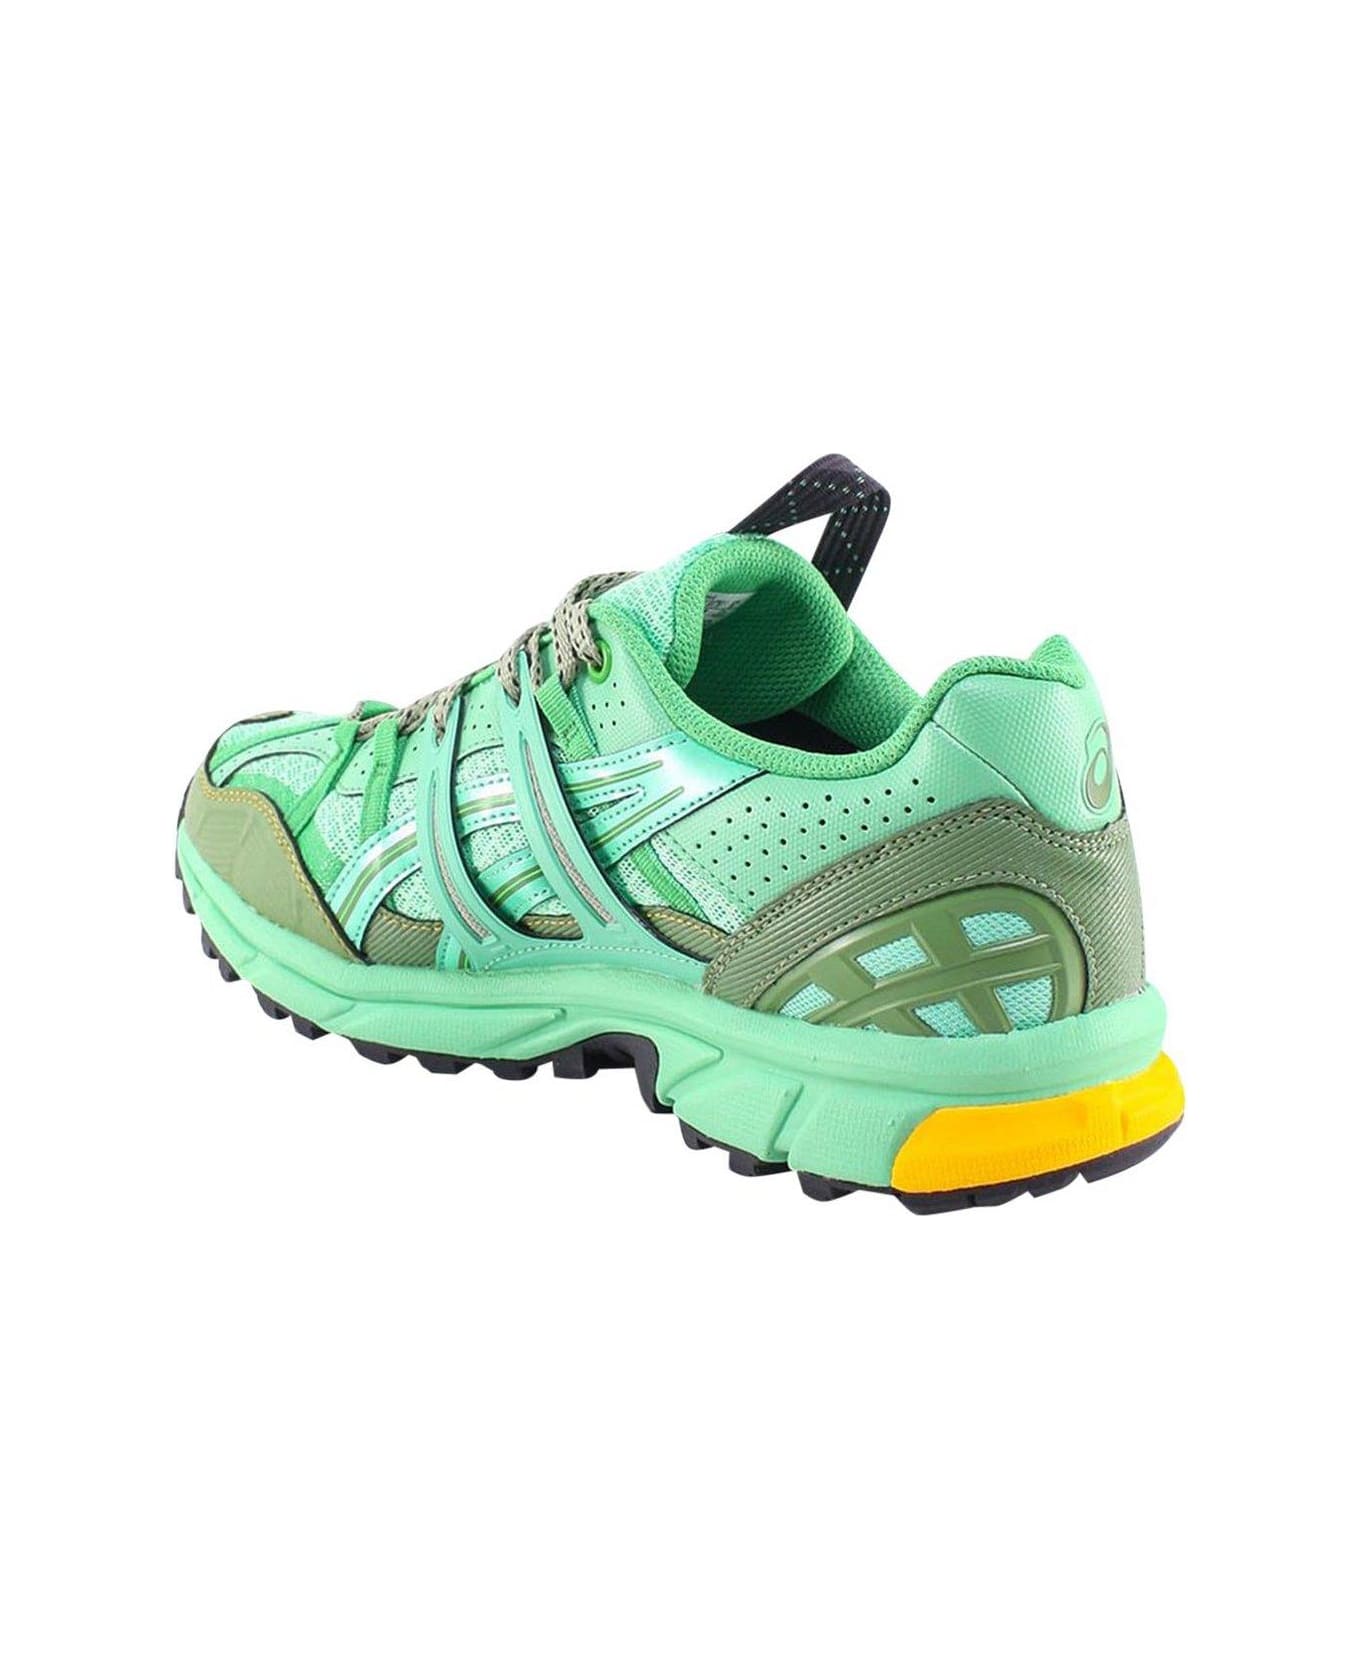 Asics Hs4-s Gel-sonoma Lace-up Sneakers - Green スニーカー